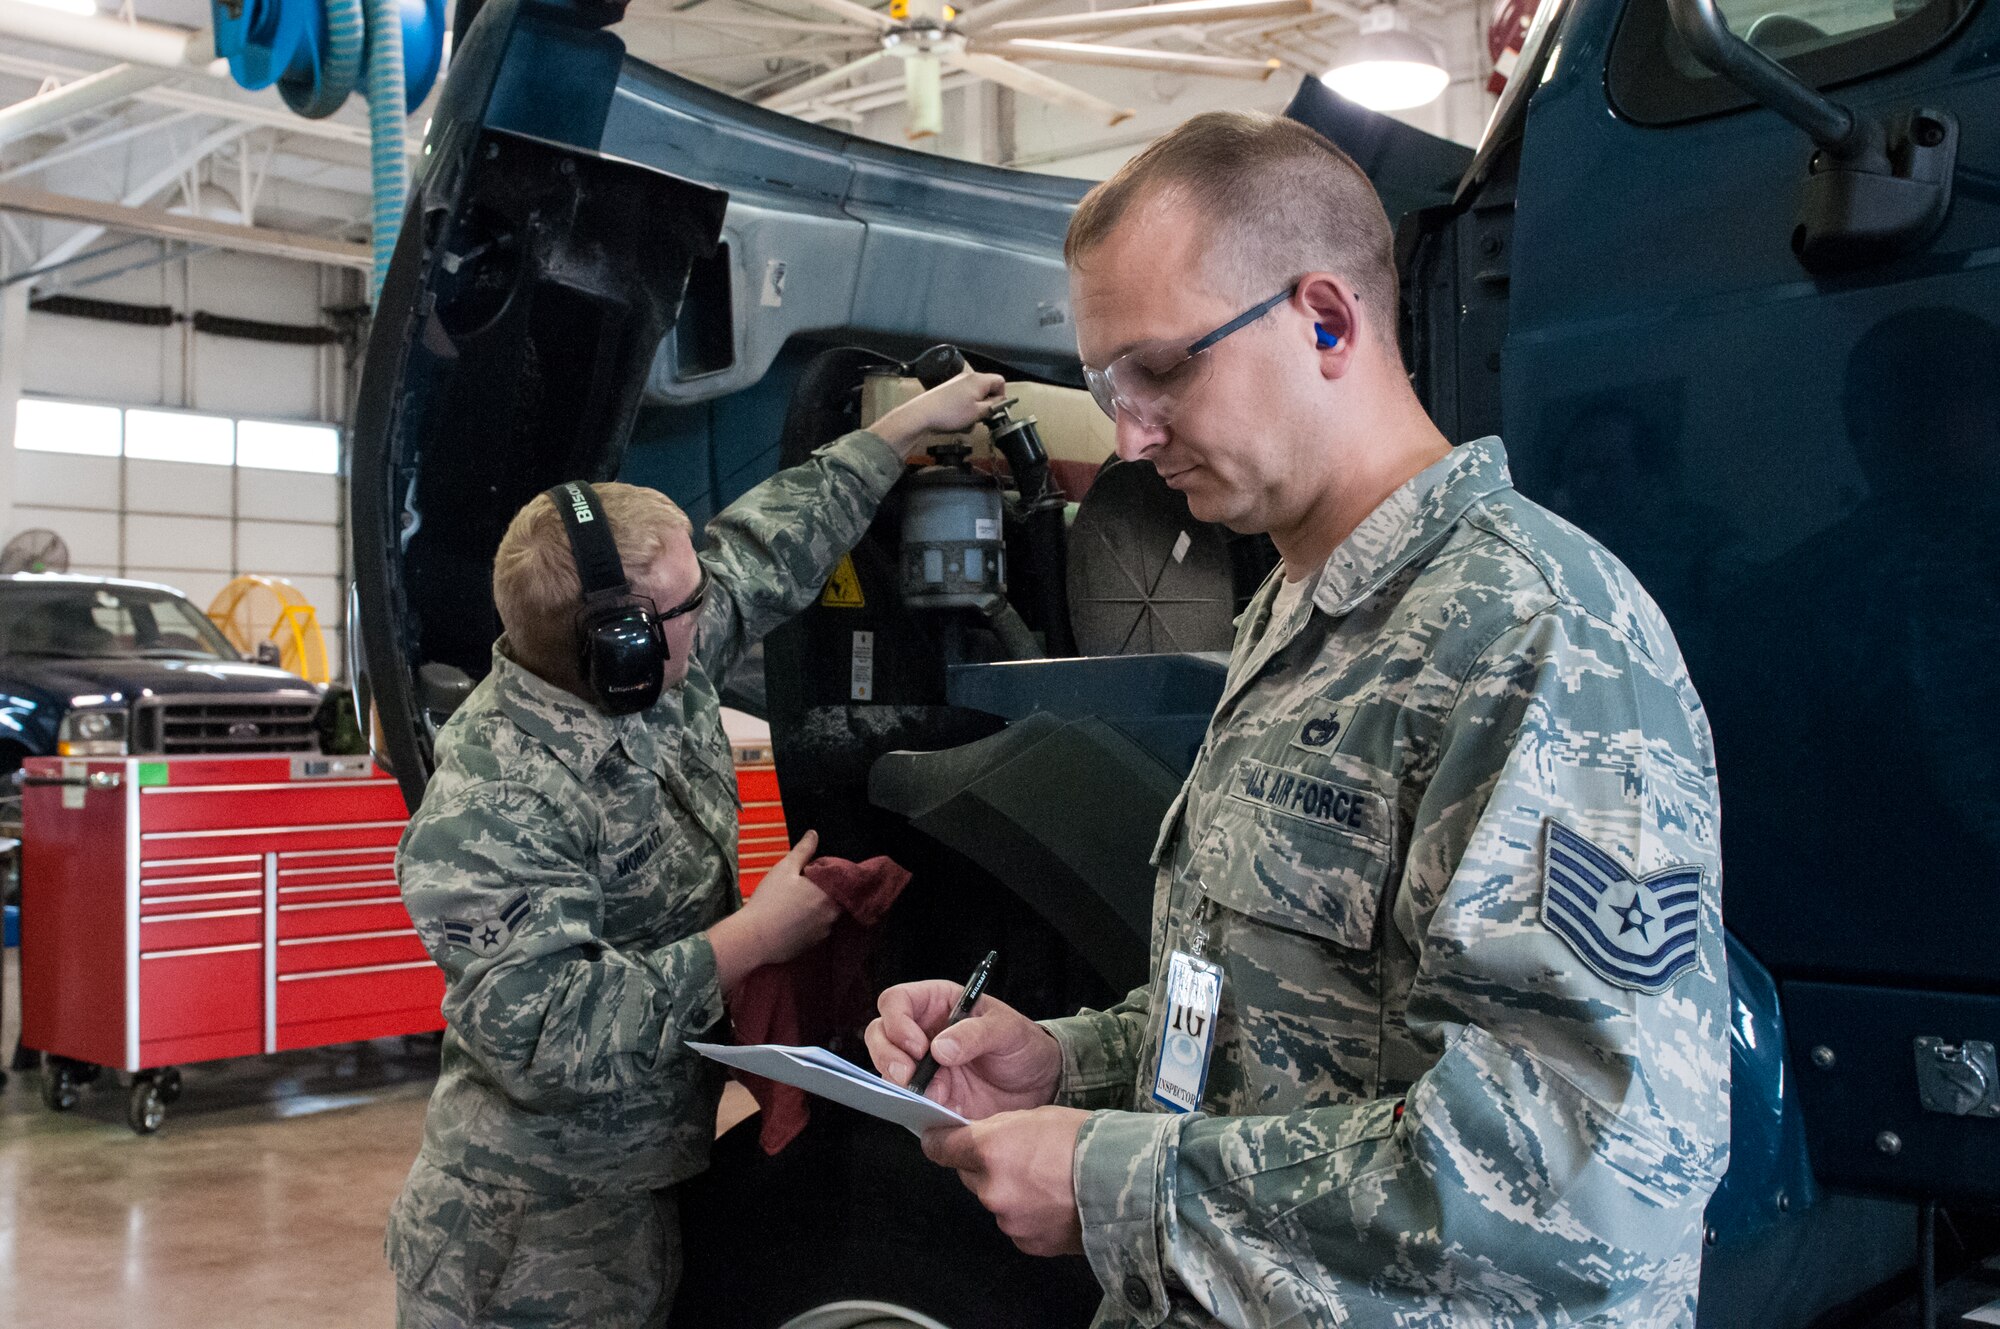 Tech. Sgt. Billy Martin, an inspector from the Air Mobility Command Office of the Inspector General, observes maintenance procedures being performed by Airman 1st Class Trey Morlatt, a vehicle maintenance technician for the Kentucky Air National Guard’s 123rd Logistics Readiness Squadron, during an inspection at the 123rd Airlift Wing in Louisville, Ky., May 18, 2013. The wing underwent a multi-disciplinary Consolidated Unit Inspection from May 15 to 22. (U.S. Air National Guard photo by Senior Airman Vicky Spesard)